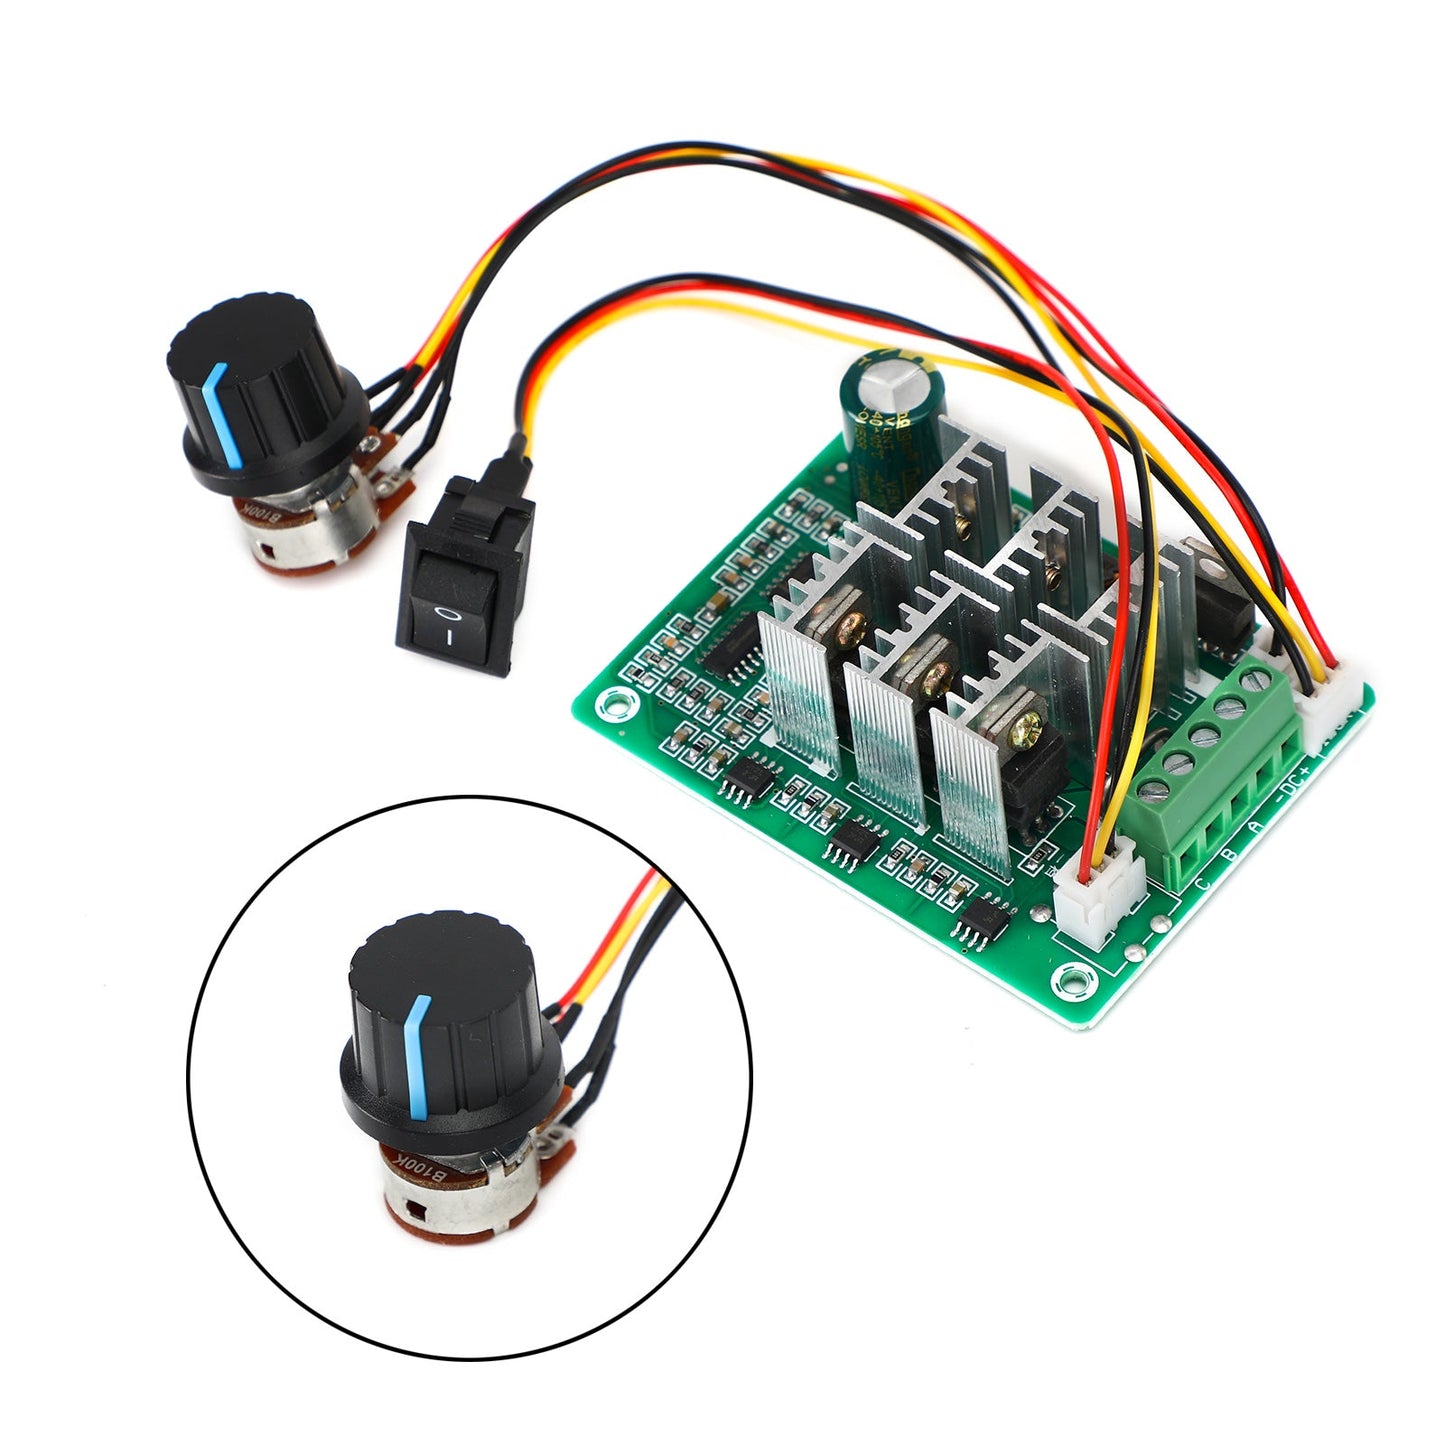 DC 5V-36V 15A PWM DC Brushless Motor Speed Control CW CCW Reversible Switch